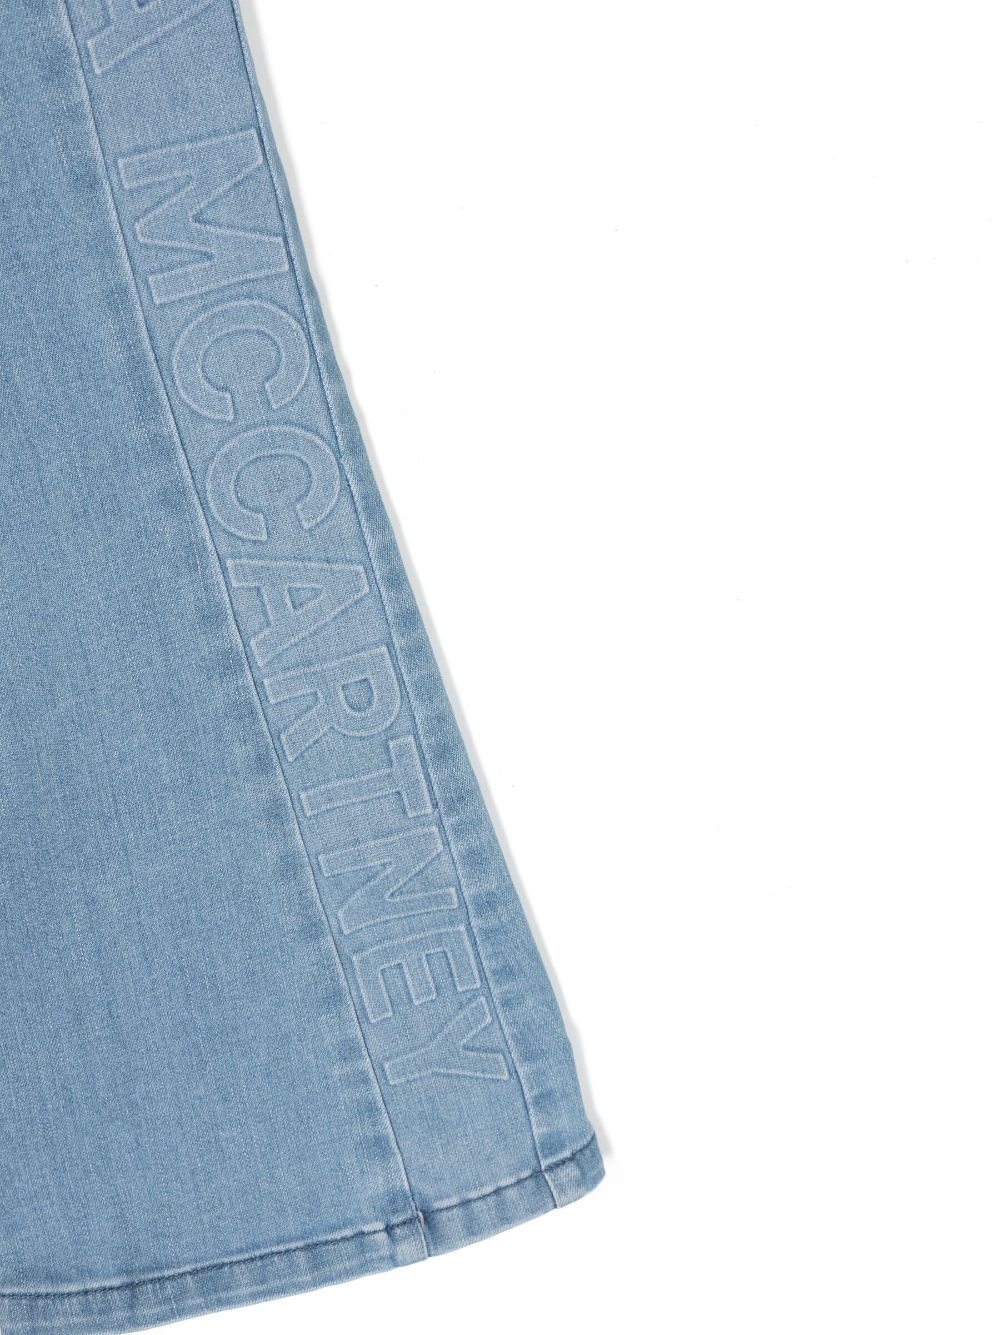 Jeans with goffrato logo